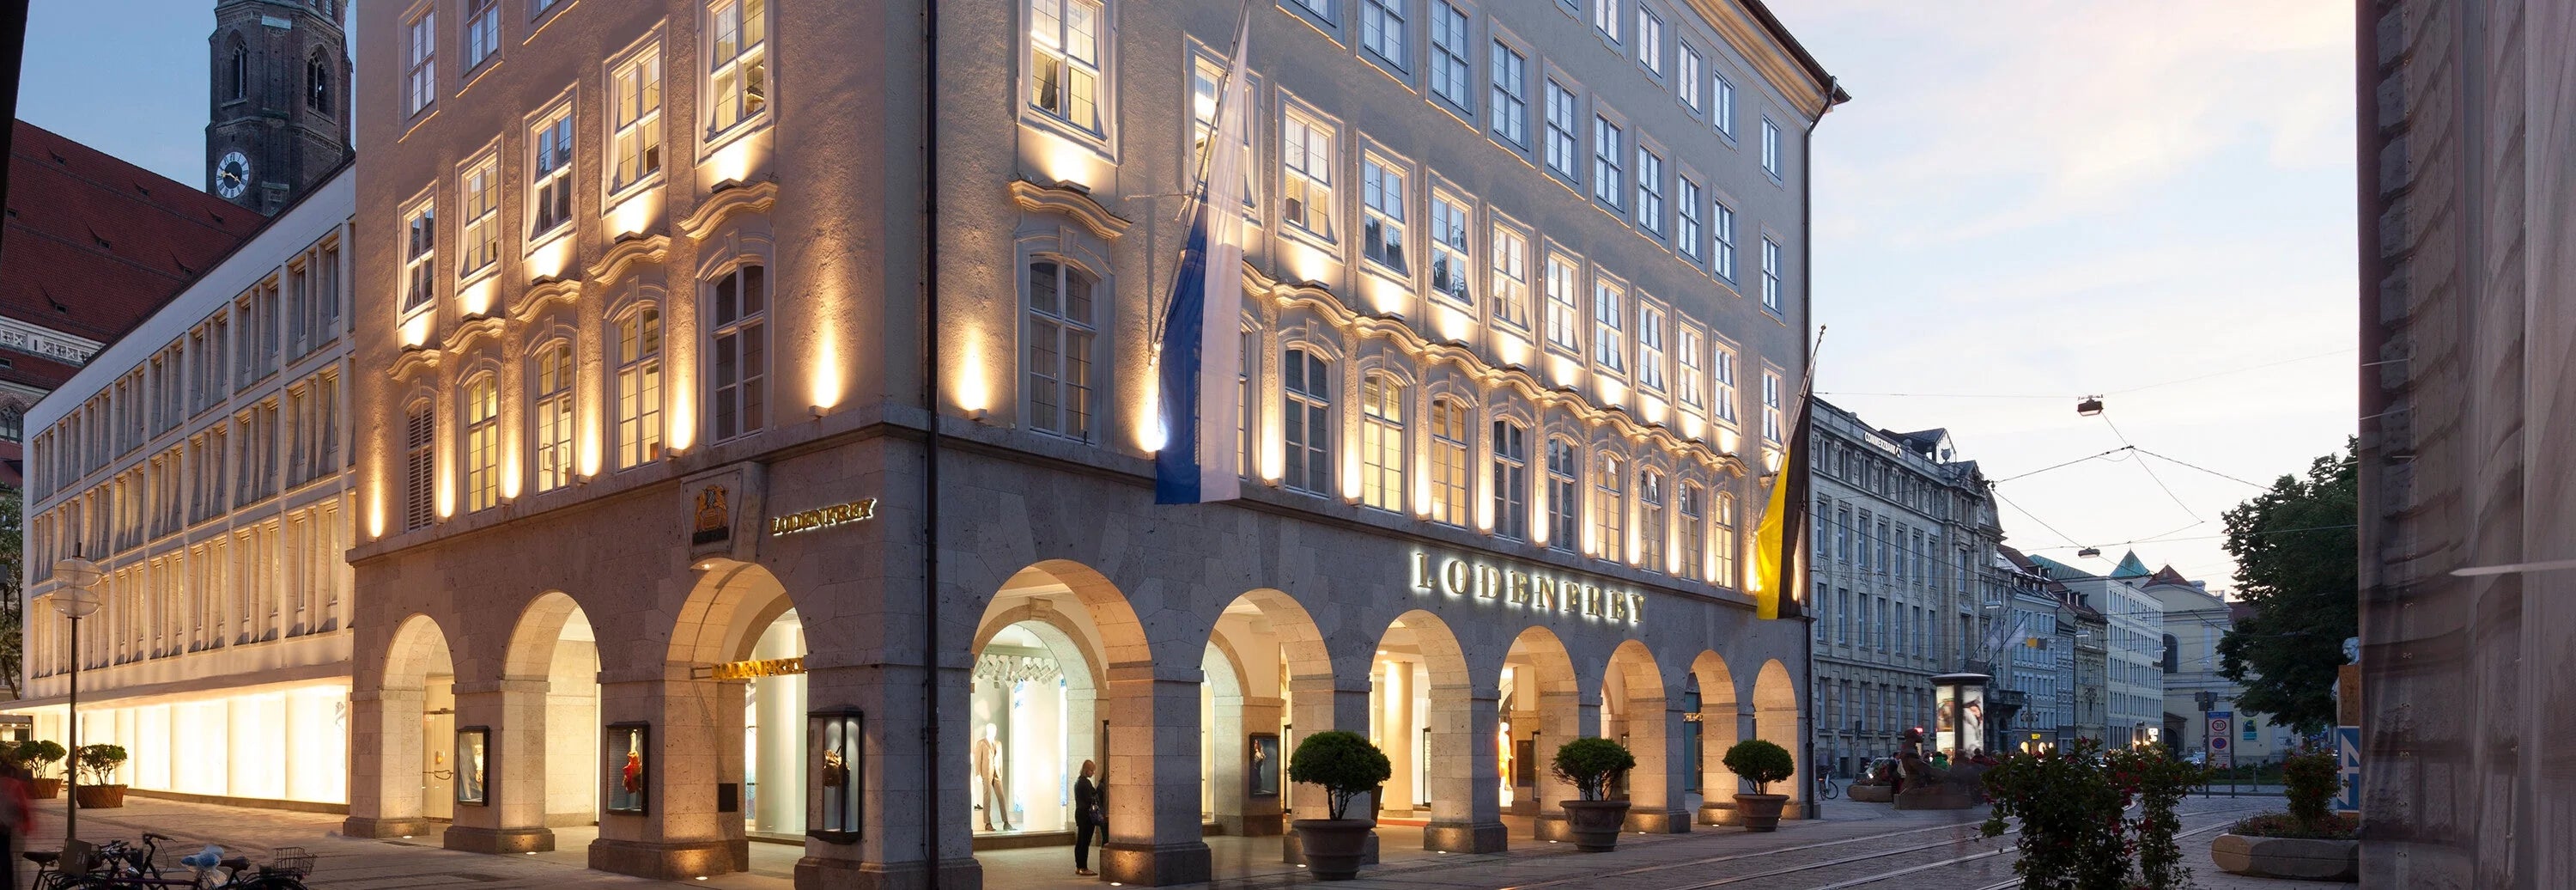 You can now find us in Munich at Lodenfrey